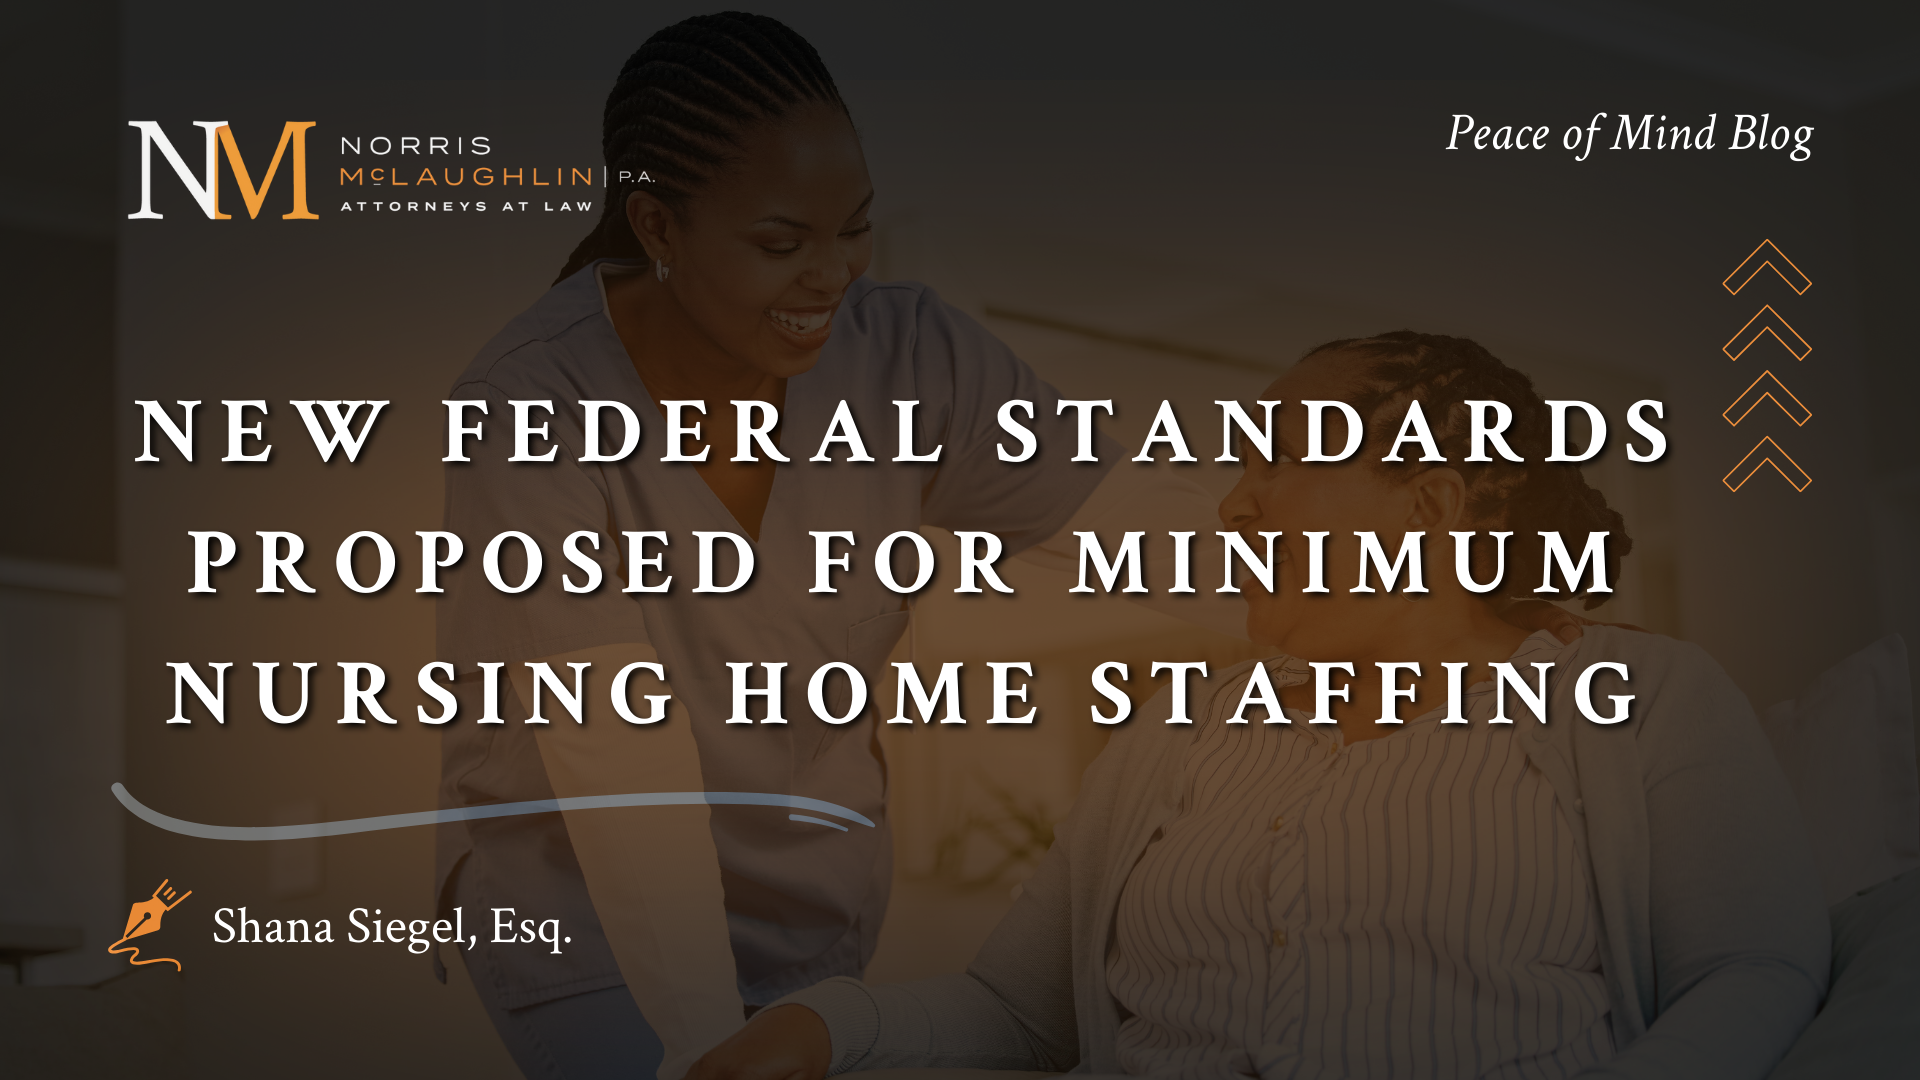 New Federal Standards Proposed for Minimum Nursing Home Staffing